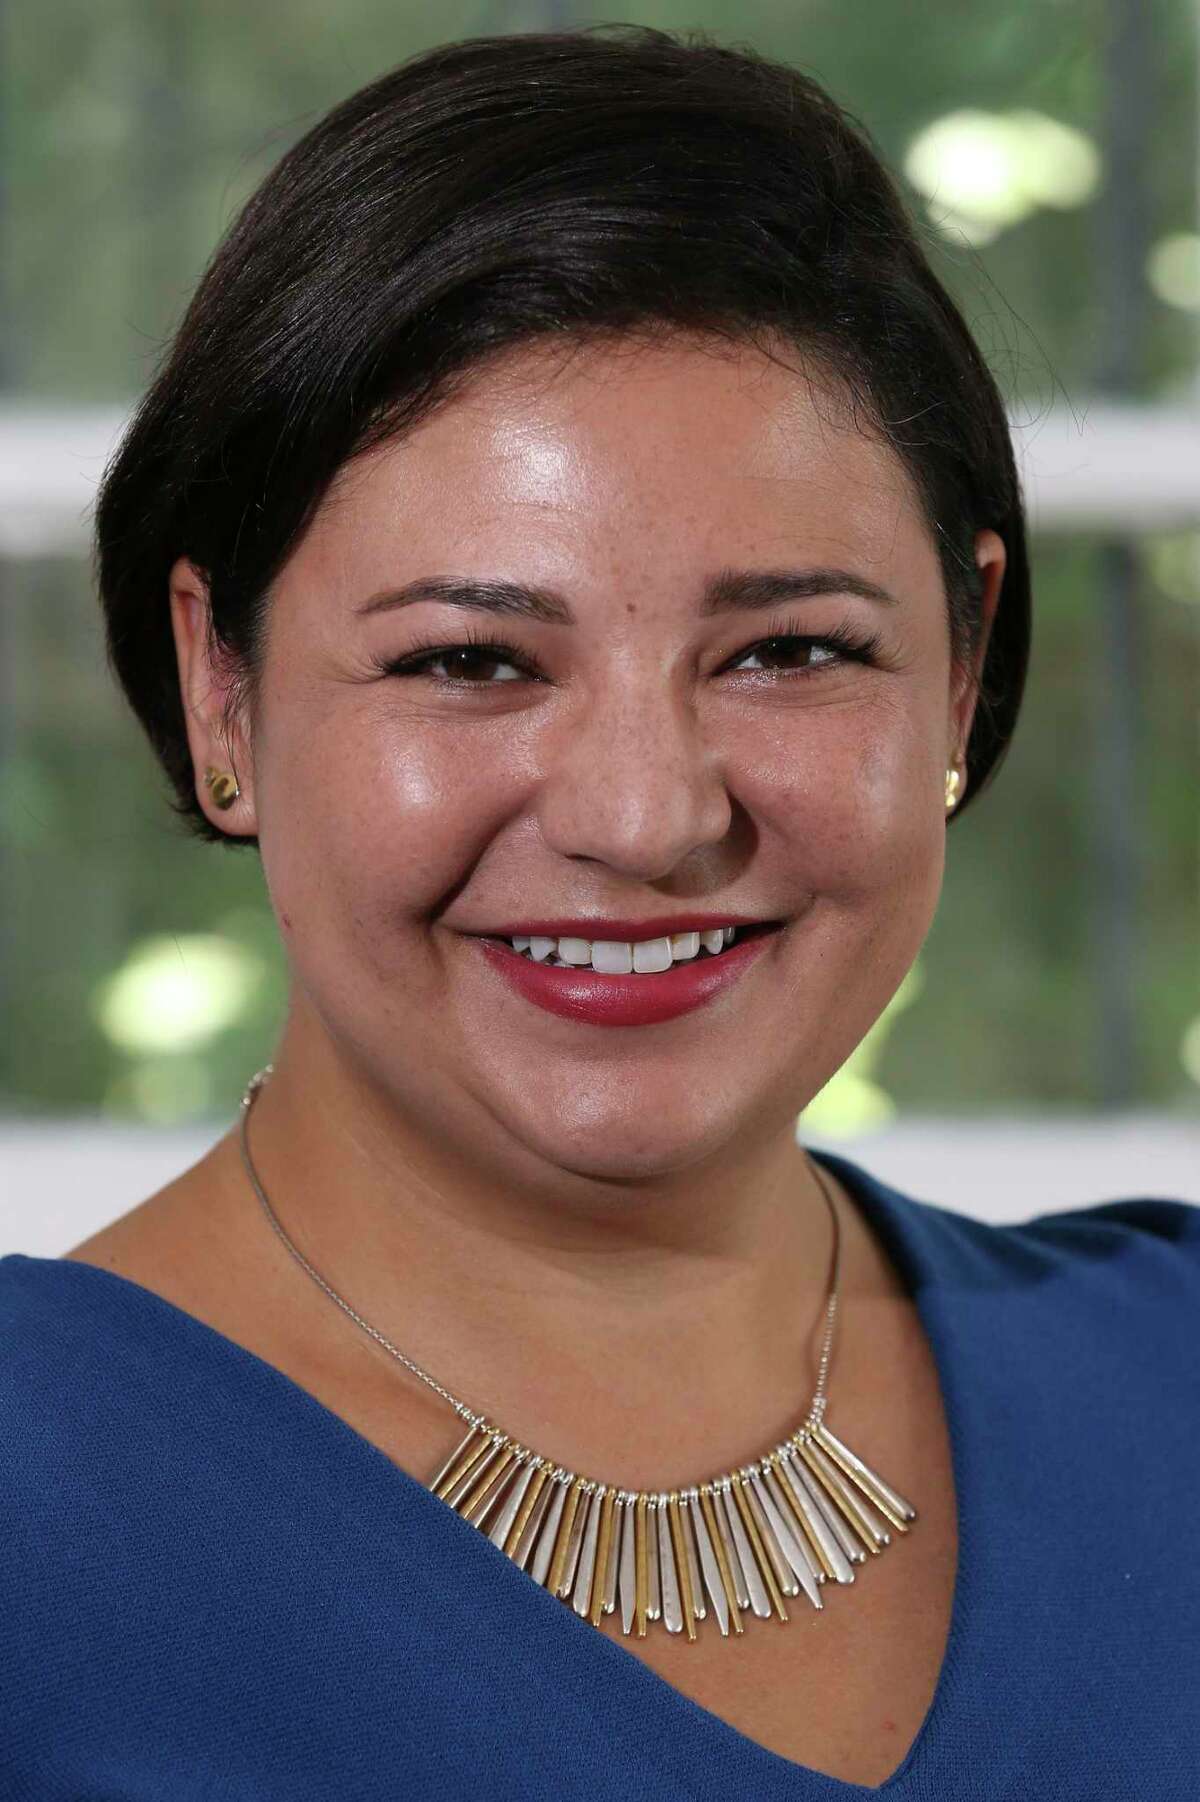 In the Democratic primary for Texas District 121, we recommend Celina Montoya, who ran for this seat two years ago.